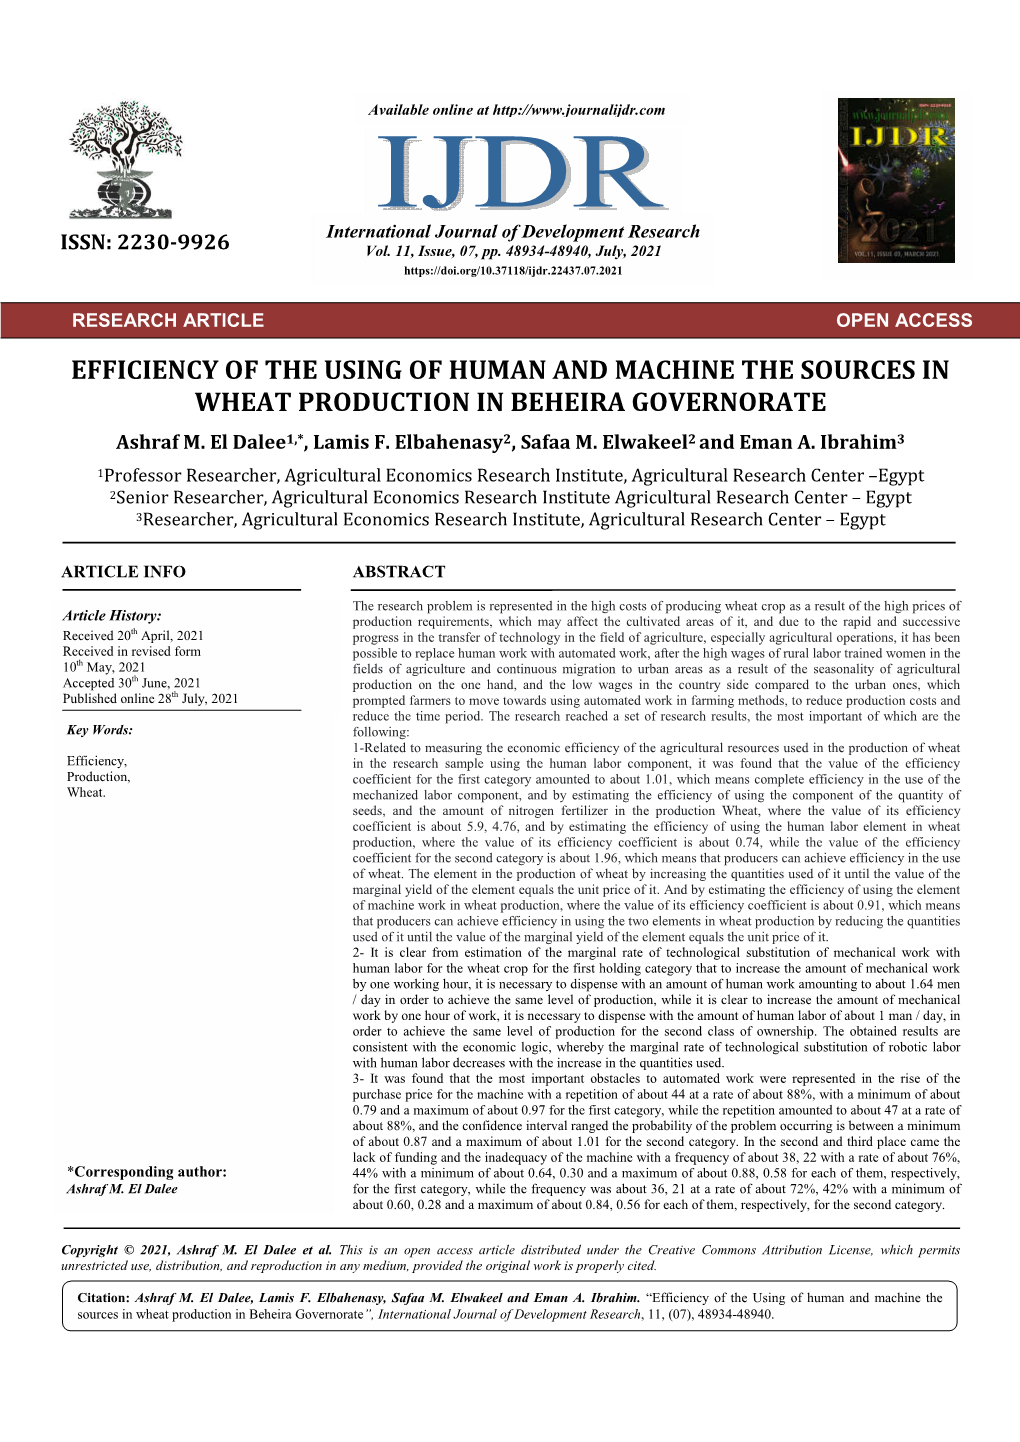 Efficiency of the Using of Human and Machine the Sources in Wheat Production in Beheira Governorate